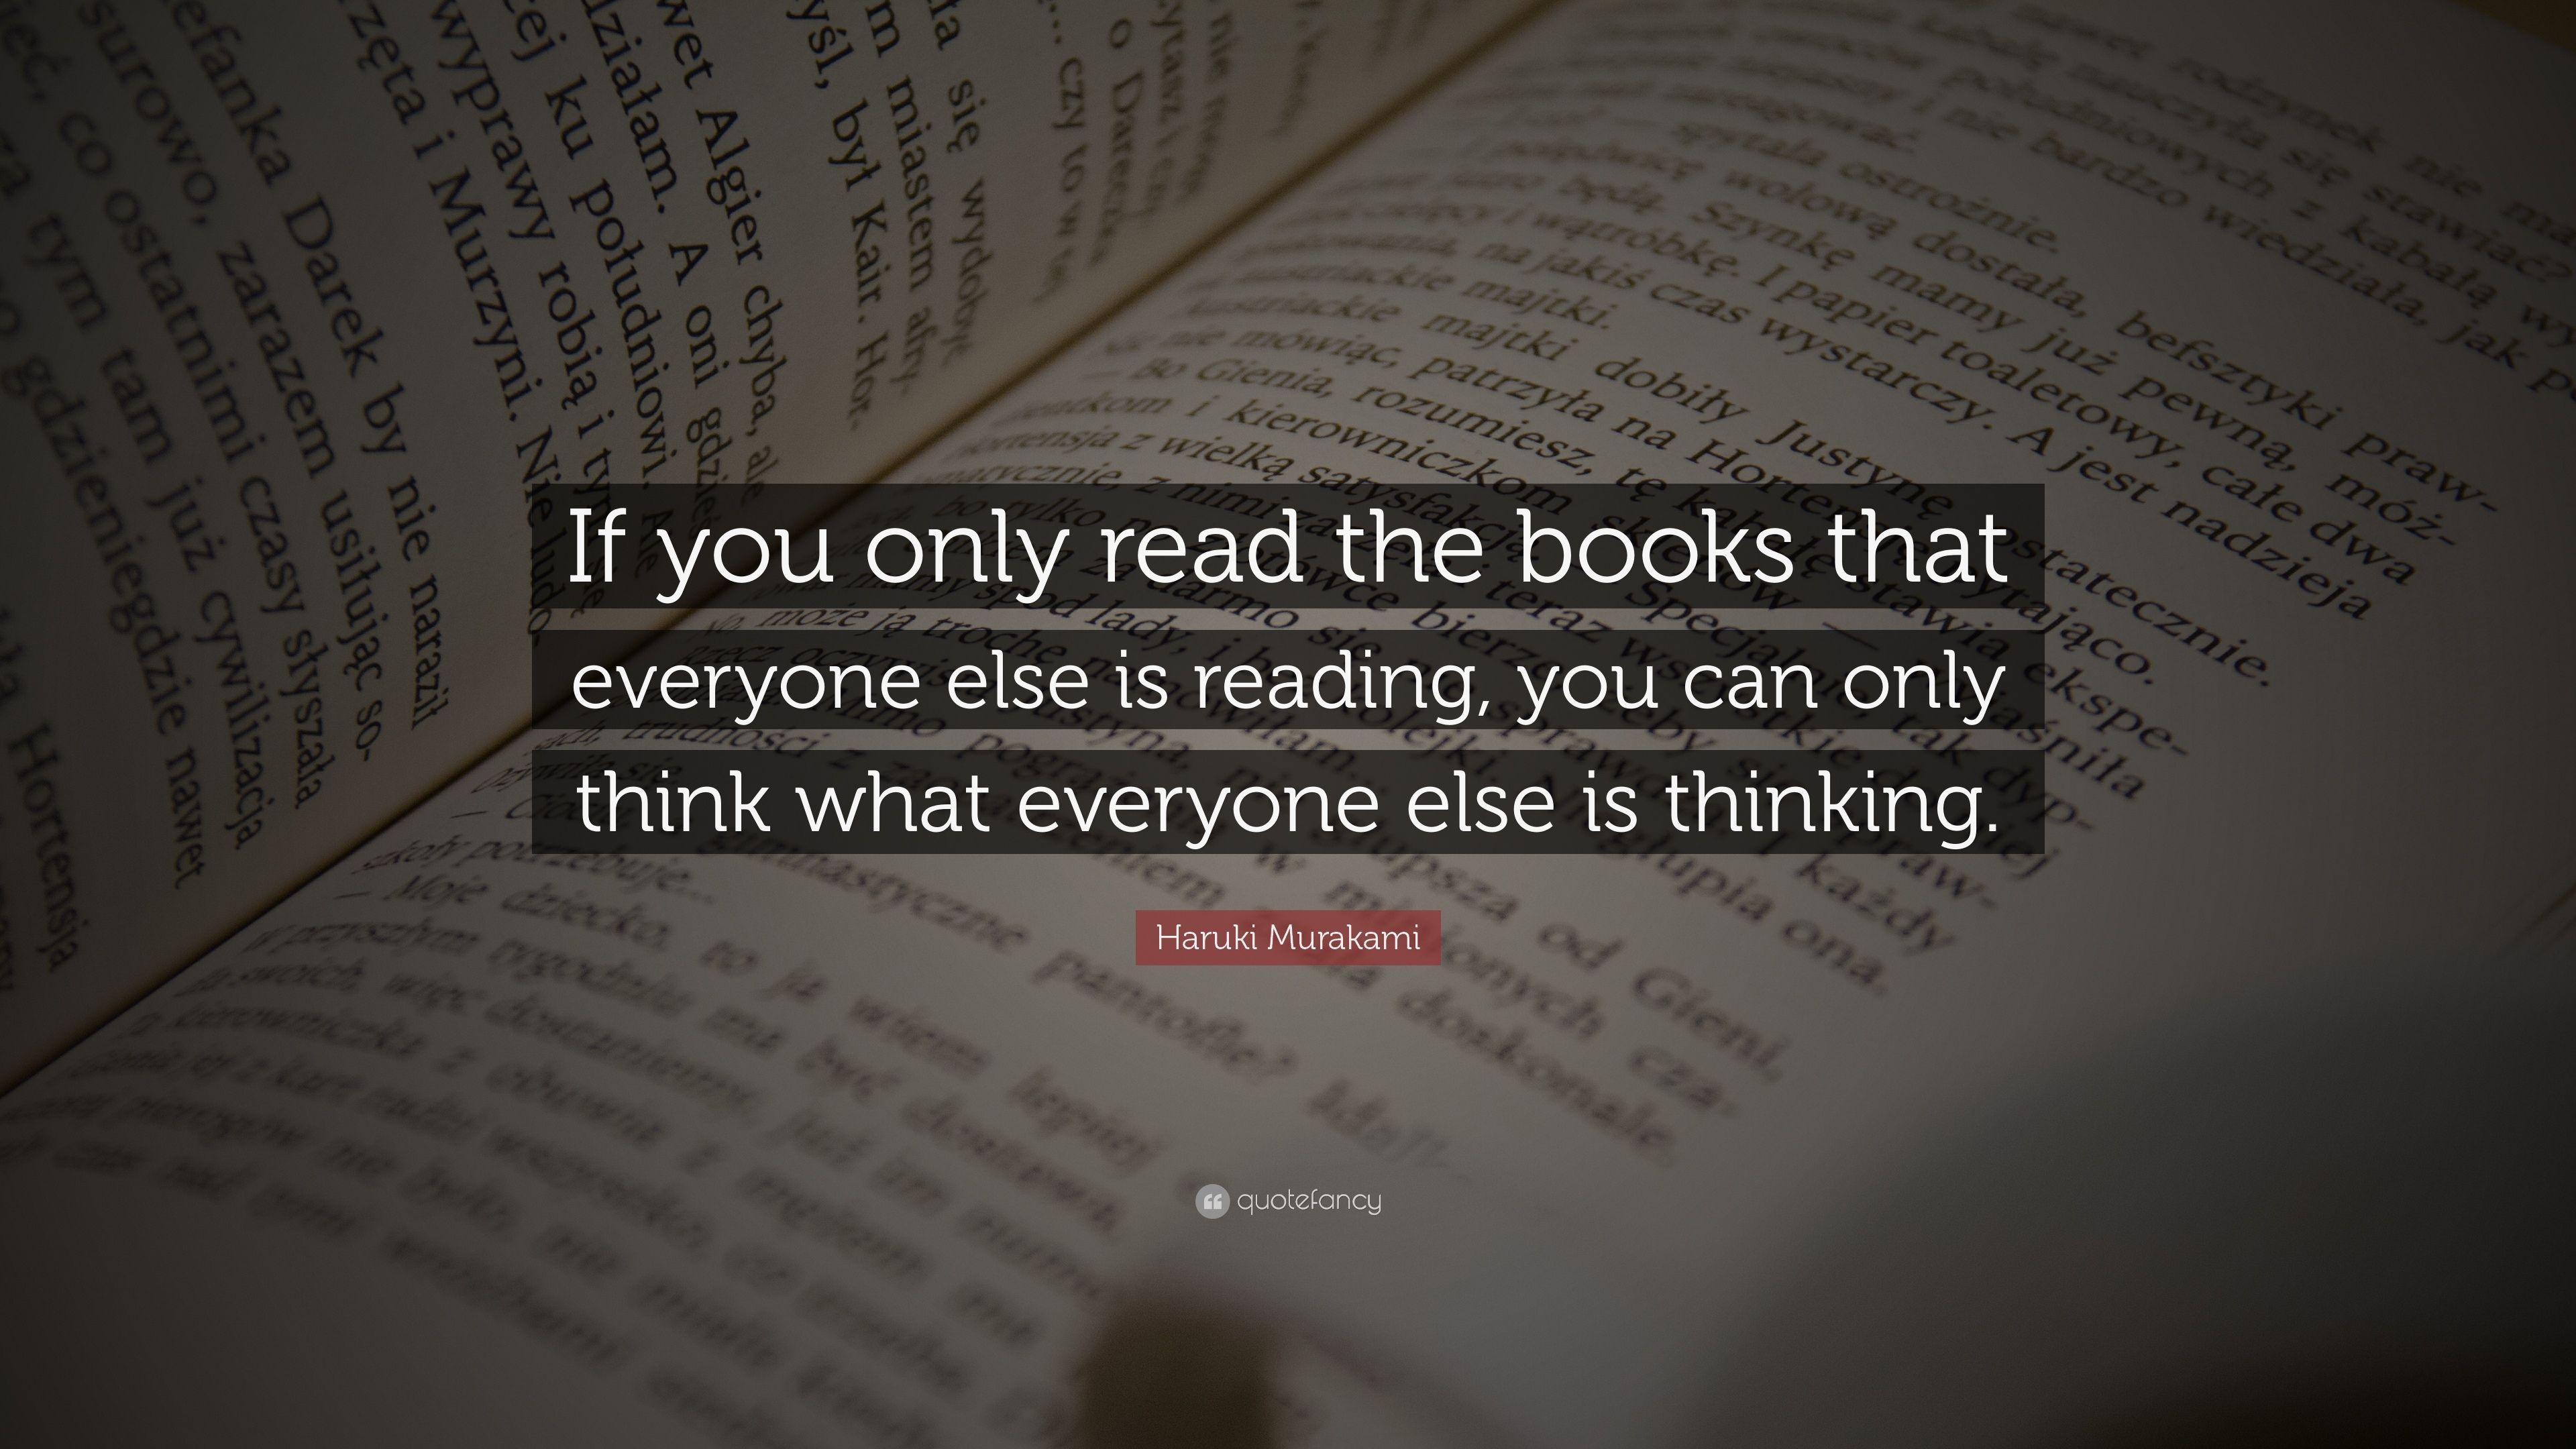 Haruki Murakami Quote: “If you only read the books that everyone